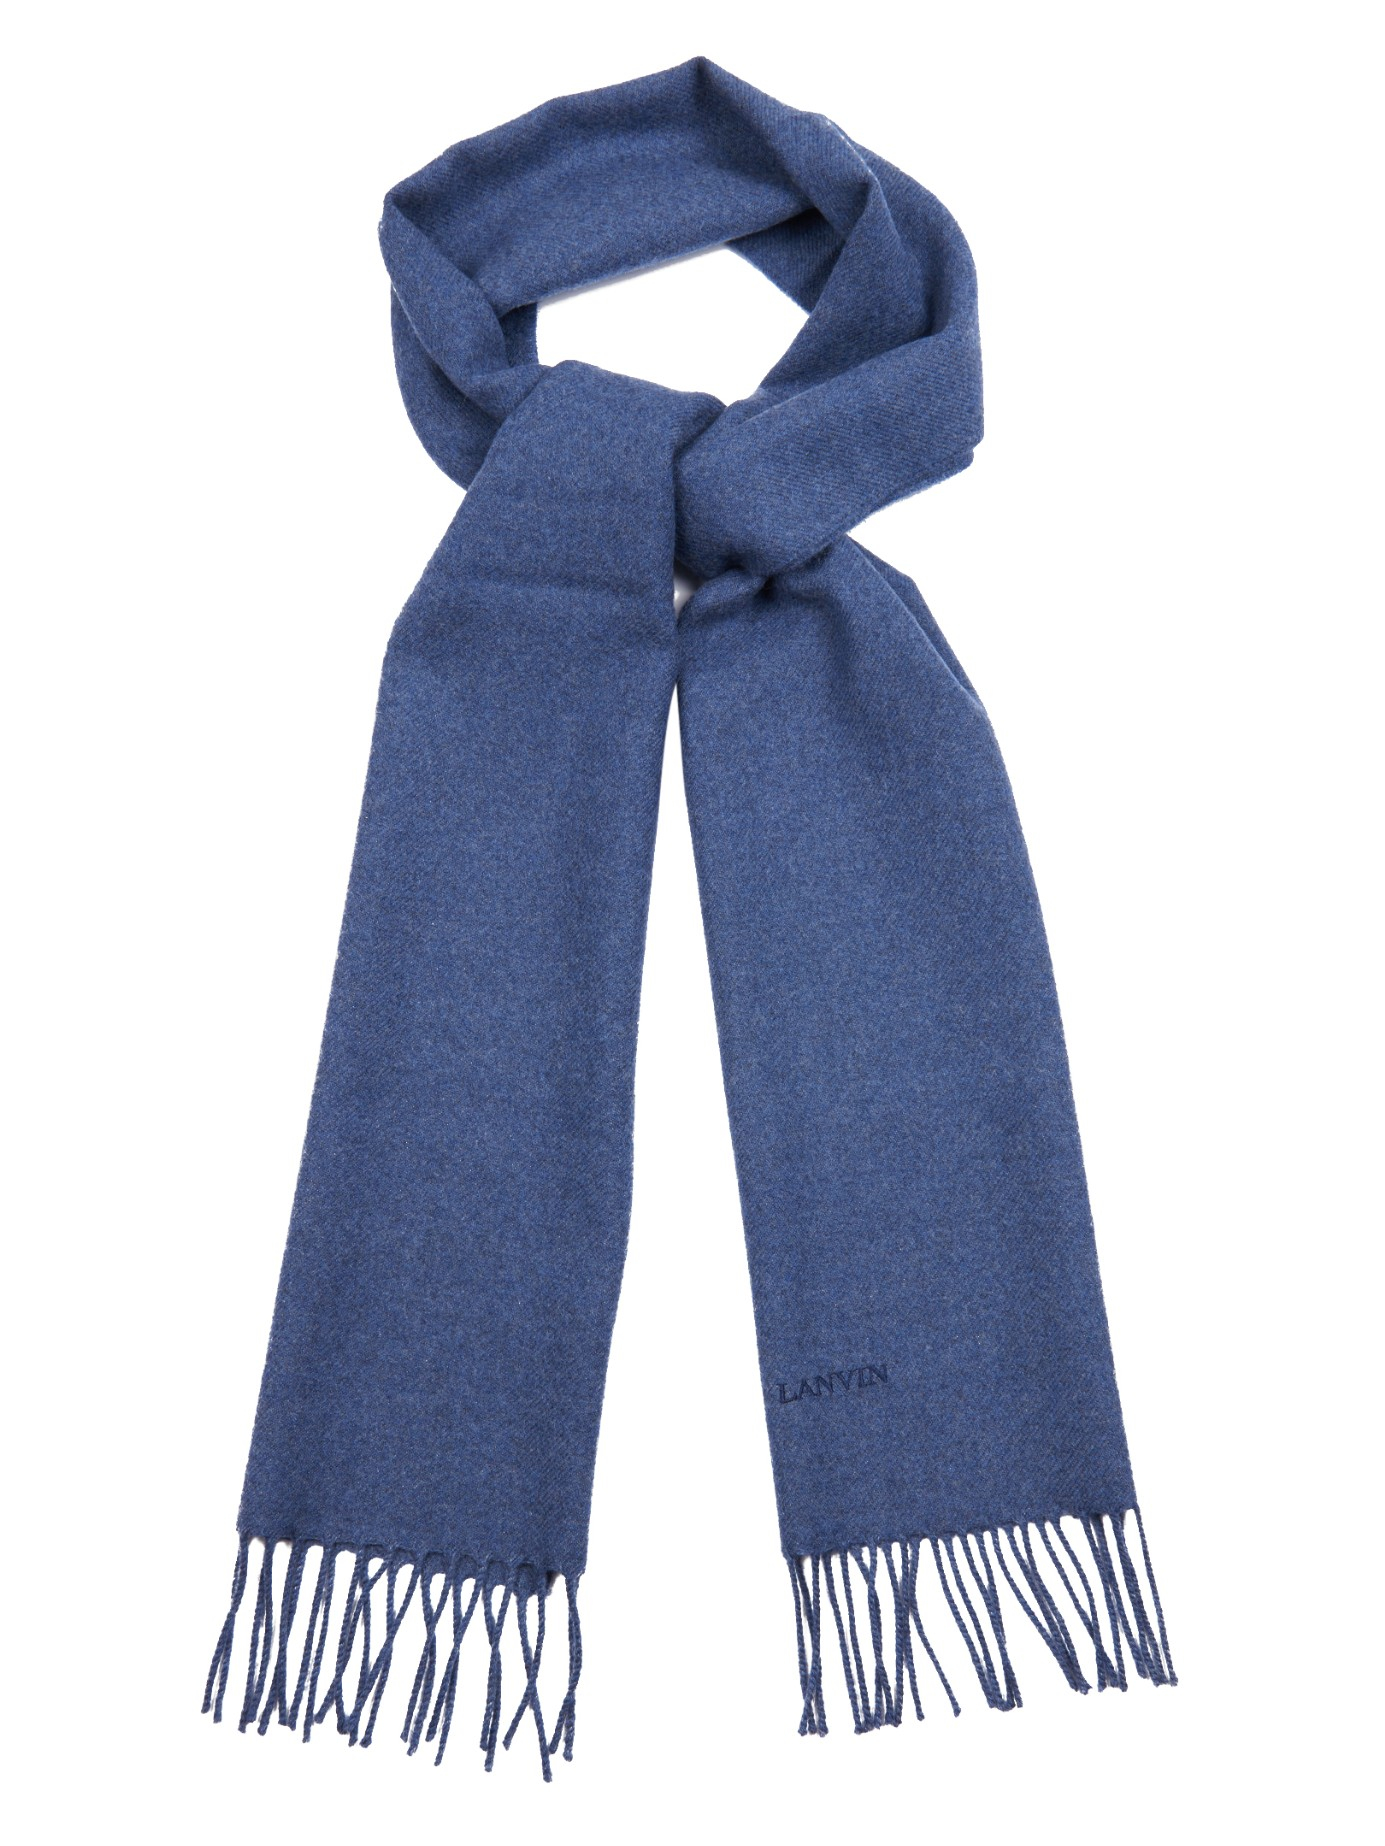 Lanvin Logo-Embroidered Wool Scarf in Blue for Men - Lyst